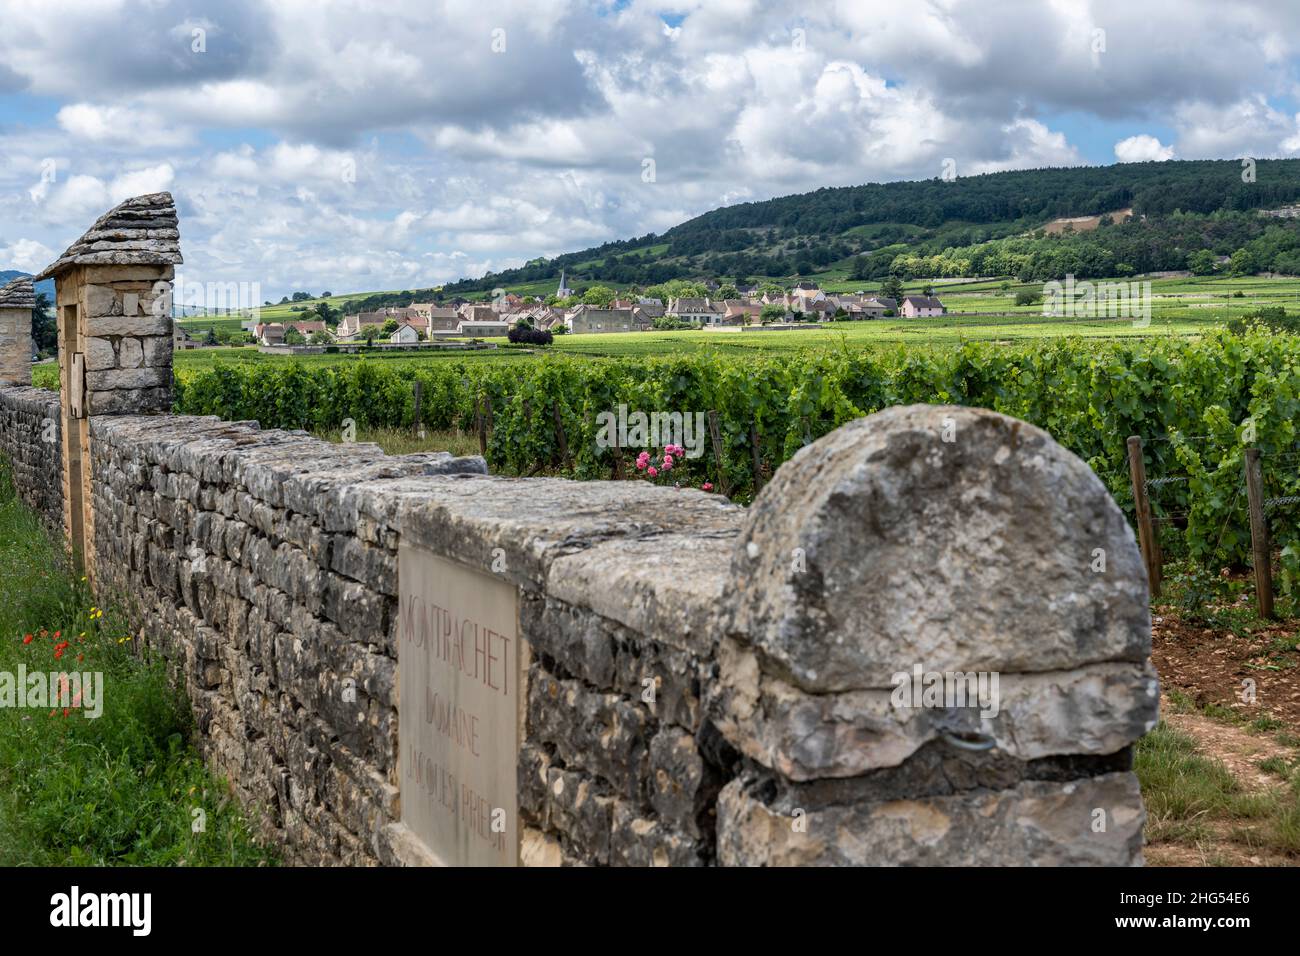 Chassagne-Montrachet, France - June 29, 2020: Vineyard Domaine Jacques Prieur with gate and wall in Burgundy, France. Stock Photo